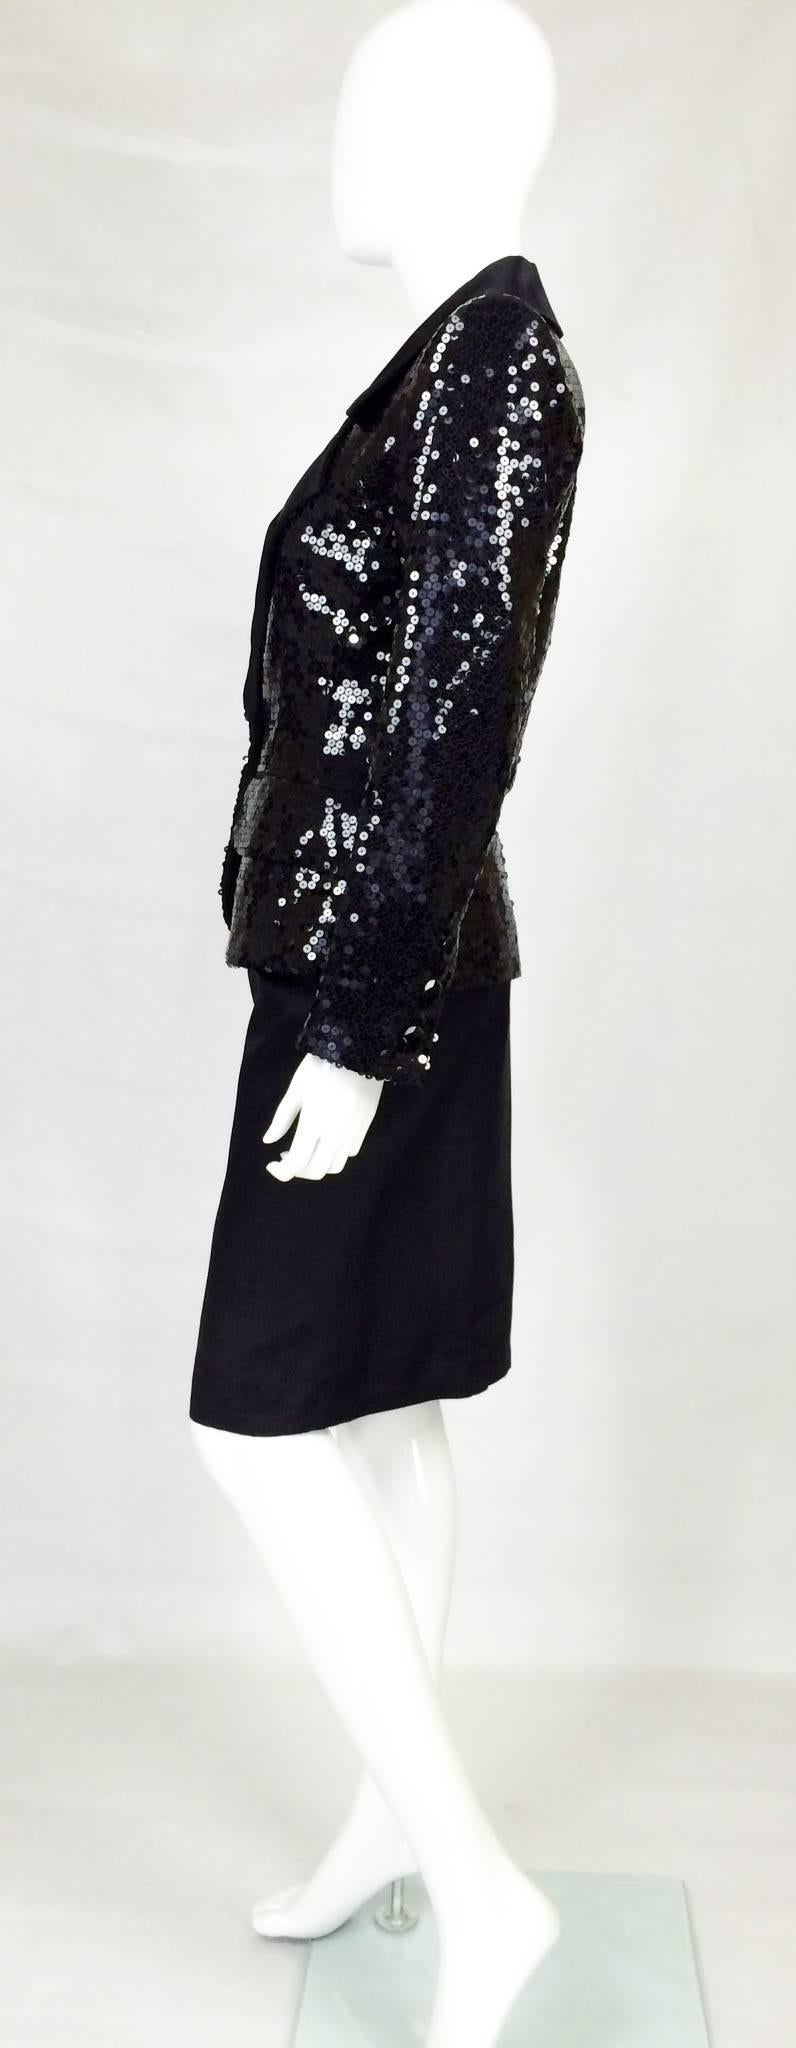 Yves Saint Laurent Le Smoking Sequin Jacket, Long and Short Satin Skirts - 1980 For Sale 2